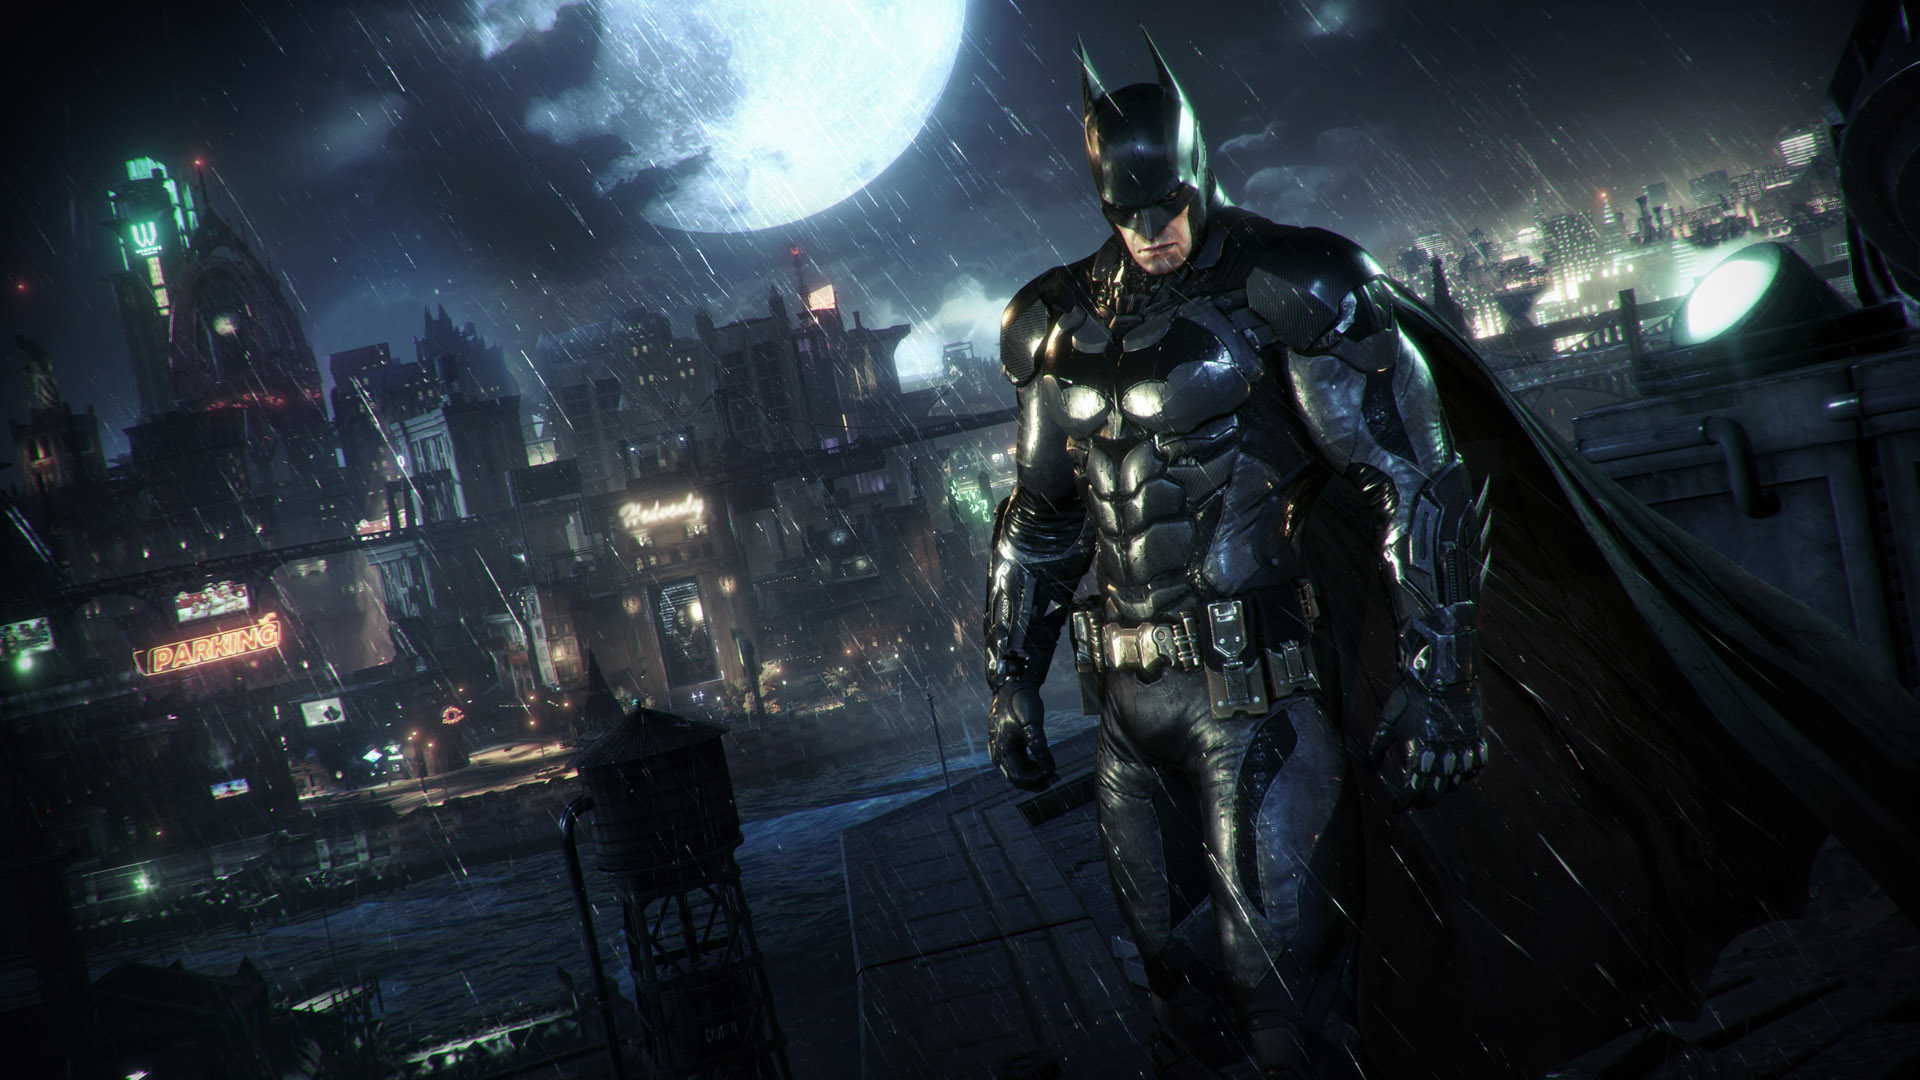 Batman: Arkham Asylum and Arkham City remastered for PS4 and One, Arkham Knight on PC digital only (Rumors)